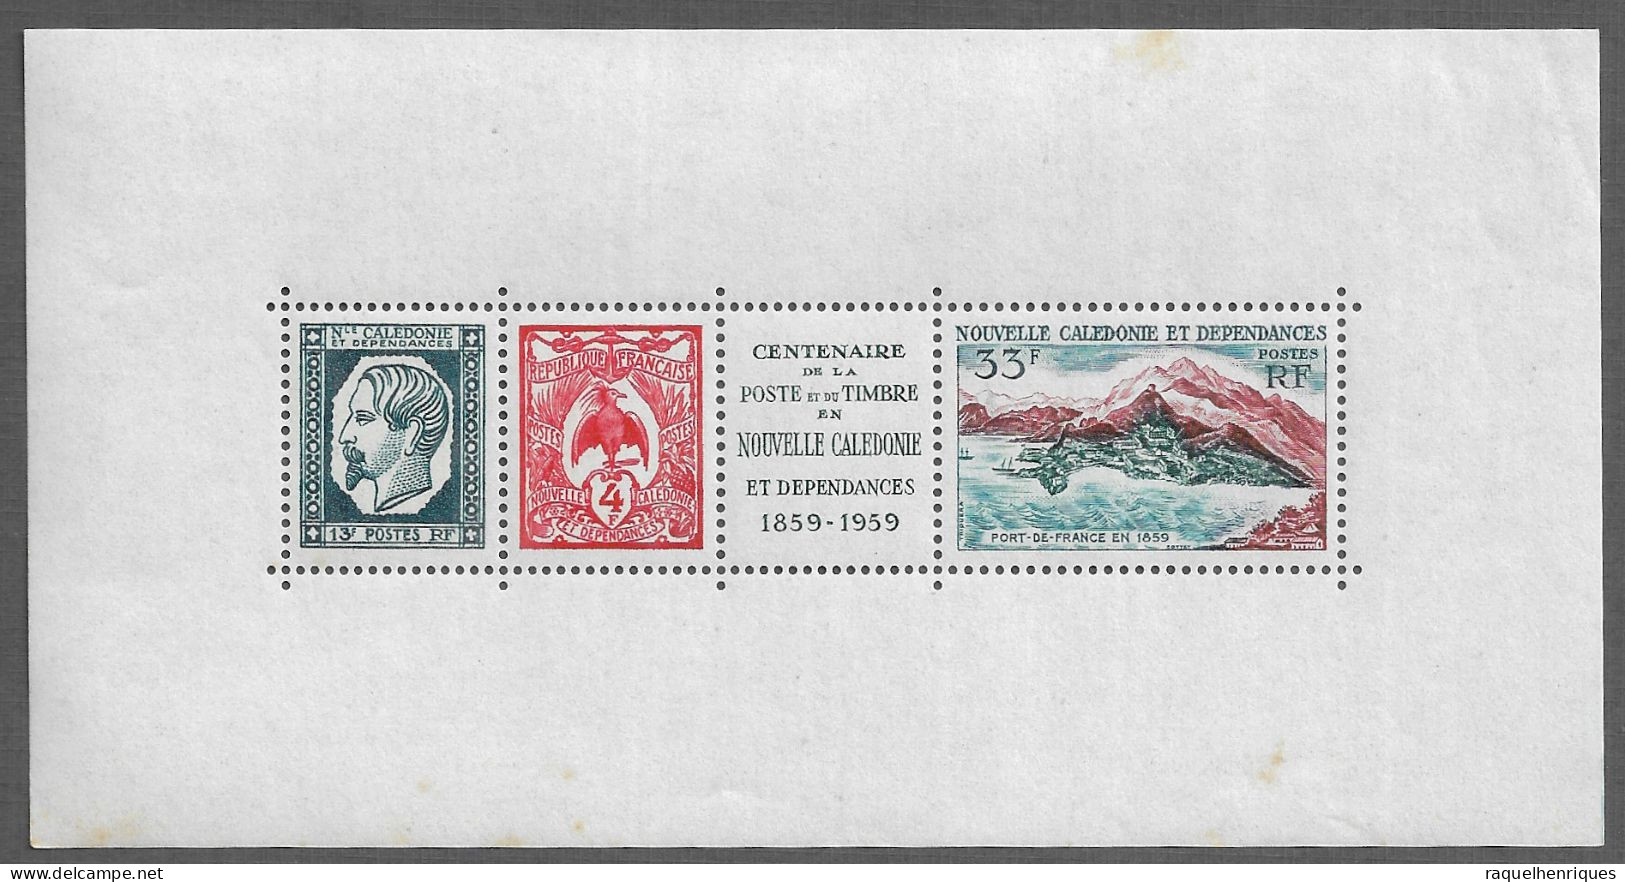 NEW CALEDONIA STAMP - 1960 The 100th Anniversary Of Postal Service In New Caledonia (NP#67-P39-L9) - Nuevos